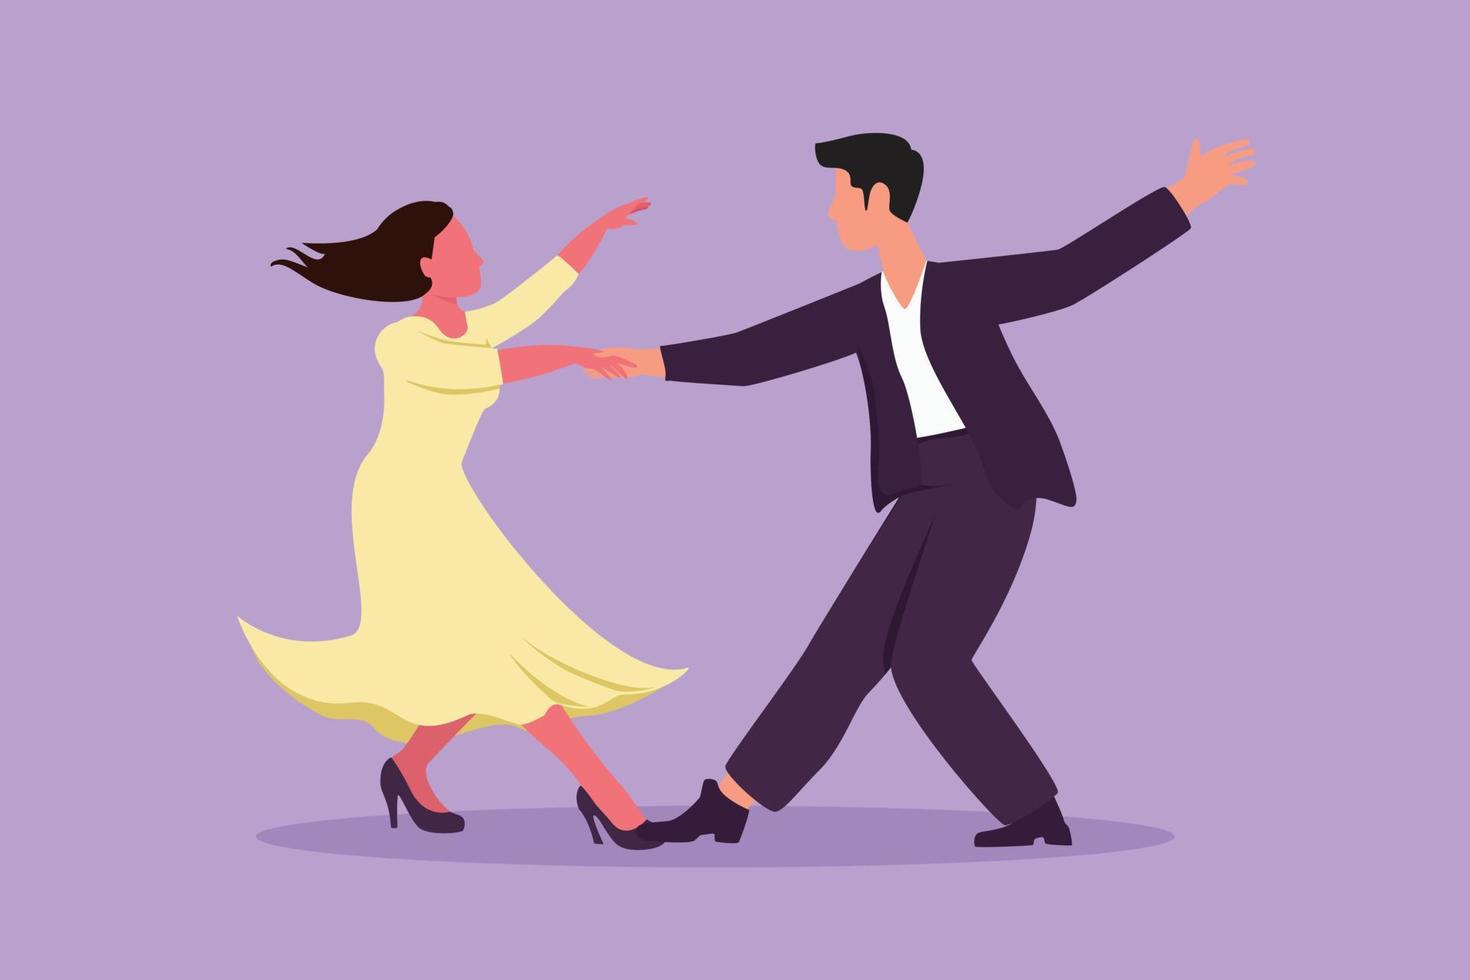 Graphic flat design drawing attractive people dancing salsa. Young man and woman in dance. Pair dancer with waltz tango and salsa style move. Couple dancing together. Cartoon style vector illustration